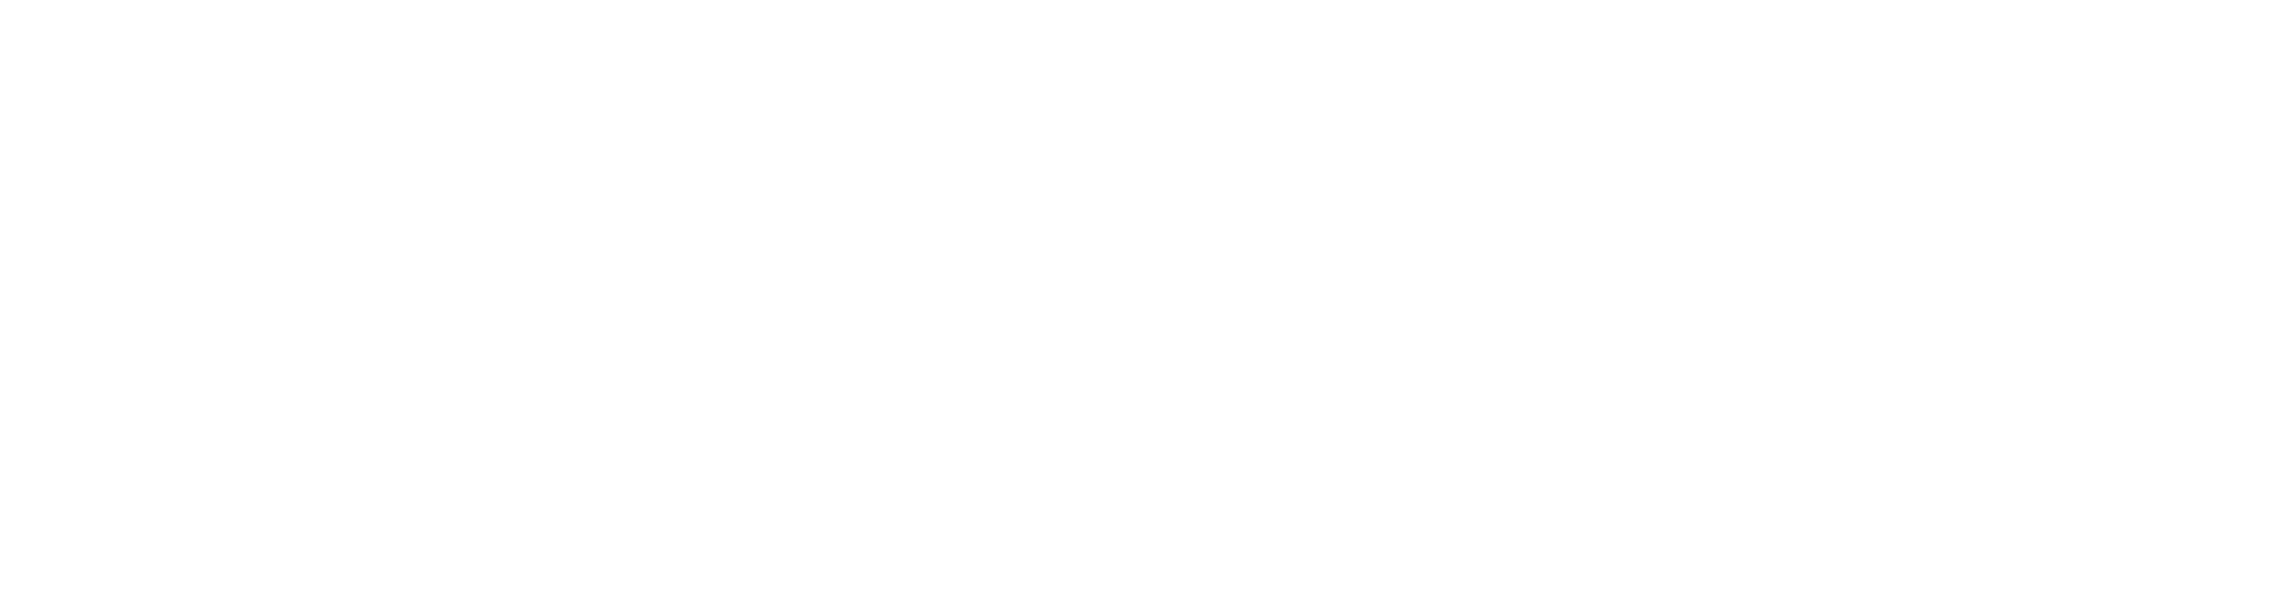 The Family Law Offices Of Megan S. Murray